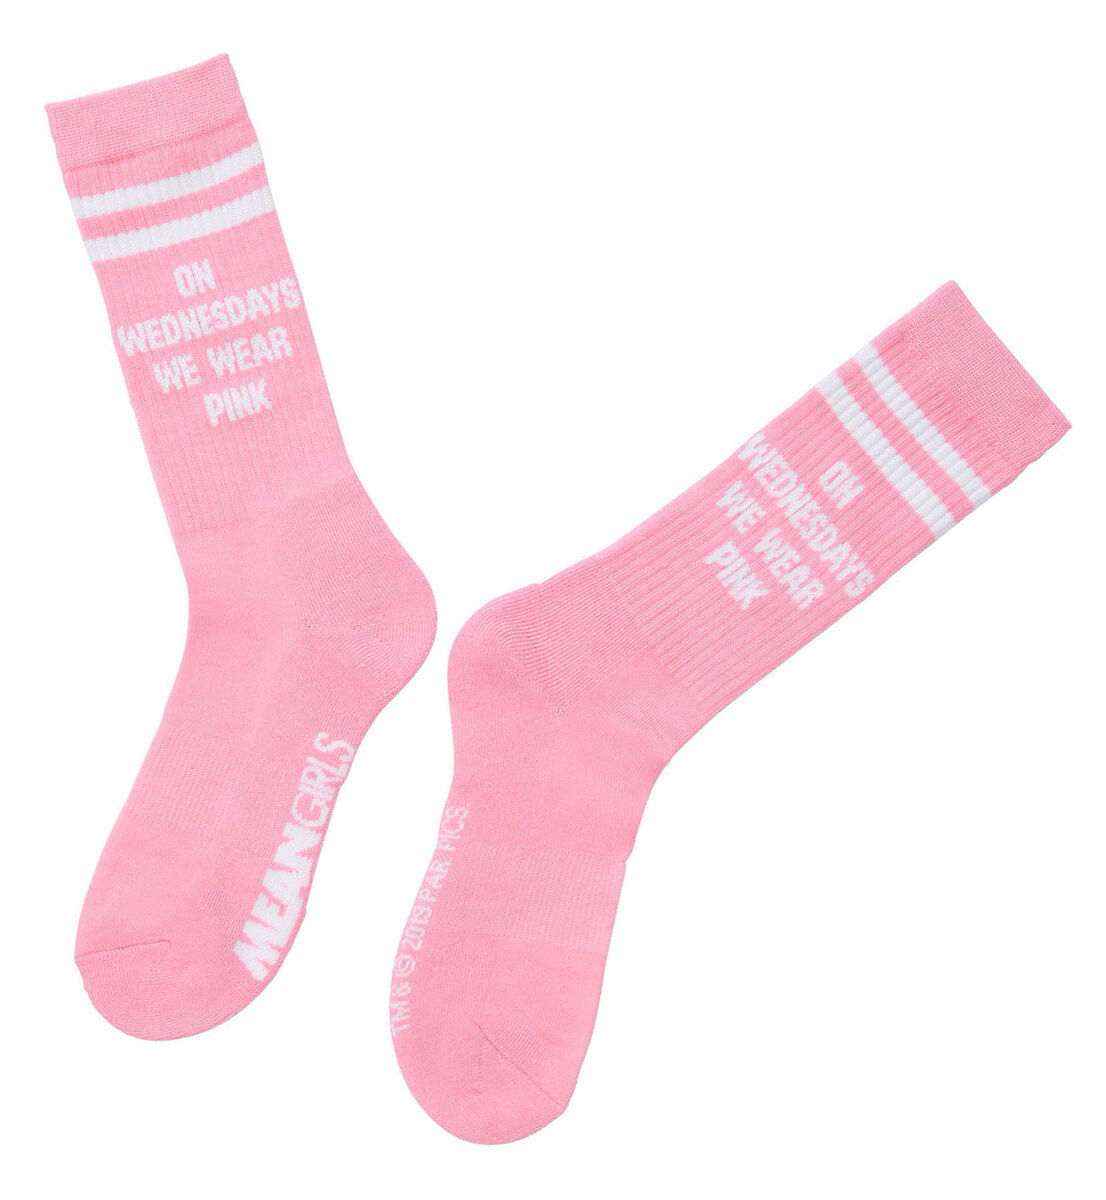  Cool Socks, Mean Girls Wear Pink Wednesday, Crew Sock, Funny  Vibrant Print : Clothing, Shoes & Jewelry